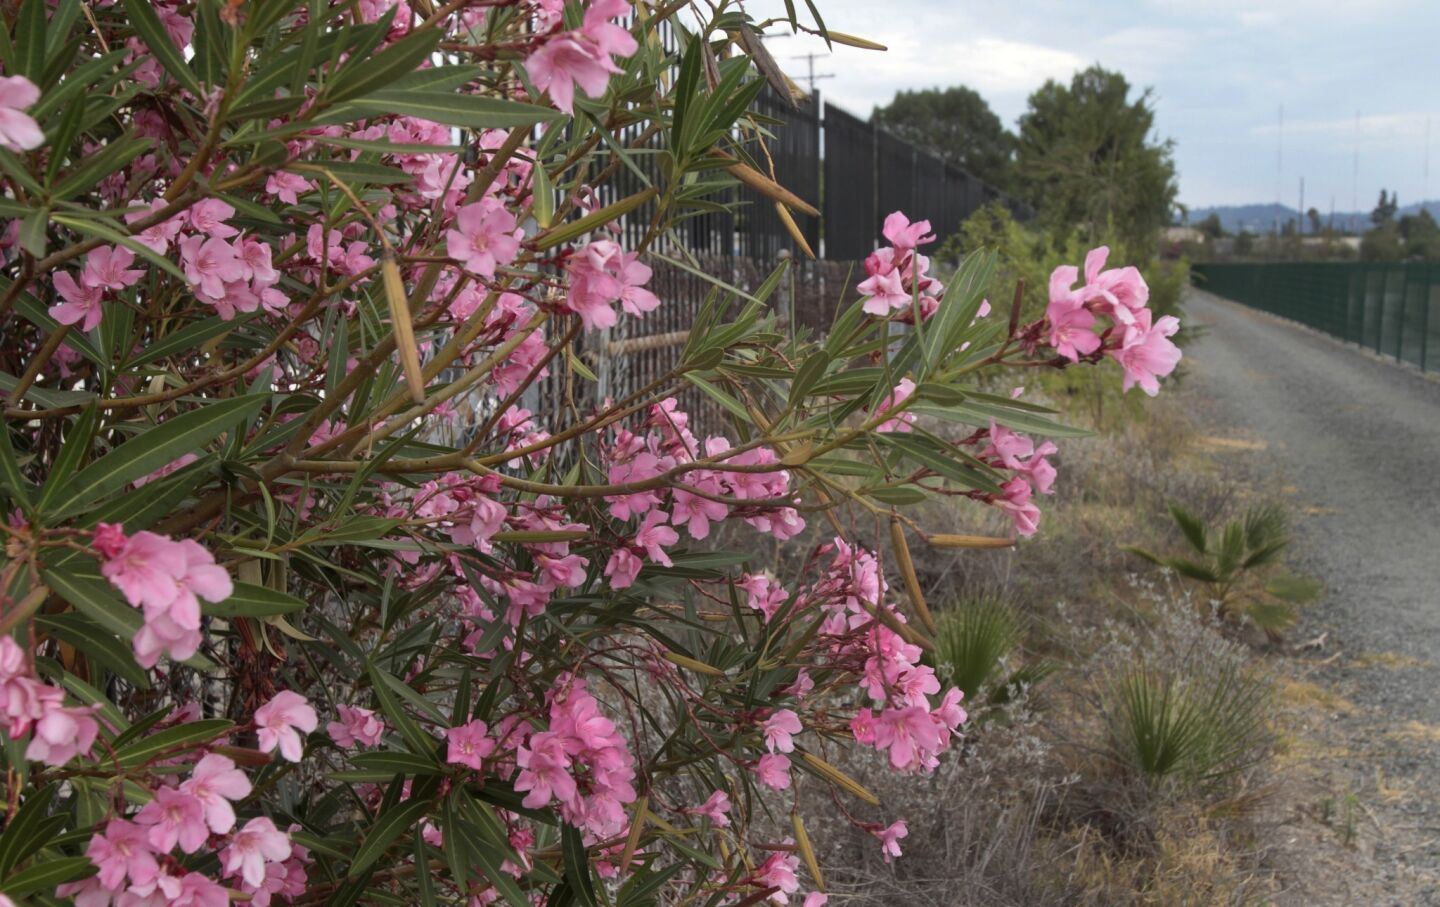 A pink oleander bush is in bloom along the concrete channel. The channel carries flood overflow from Hansen Dam, nine miles away.